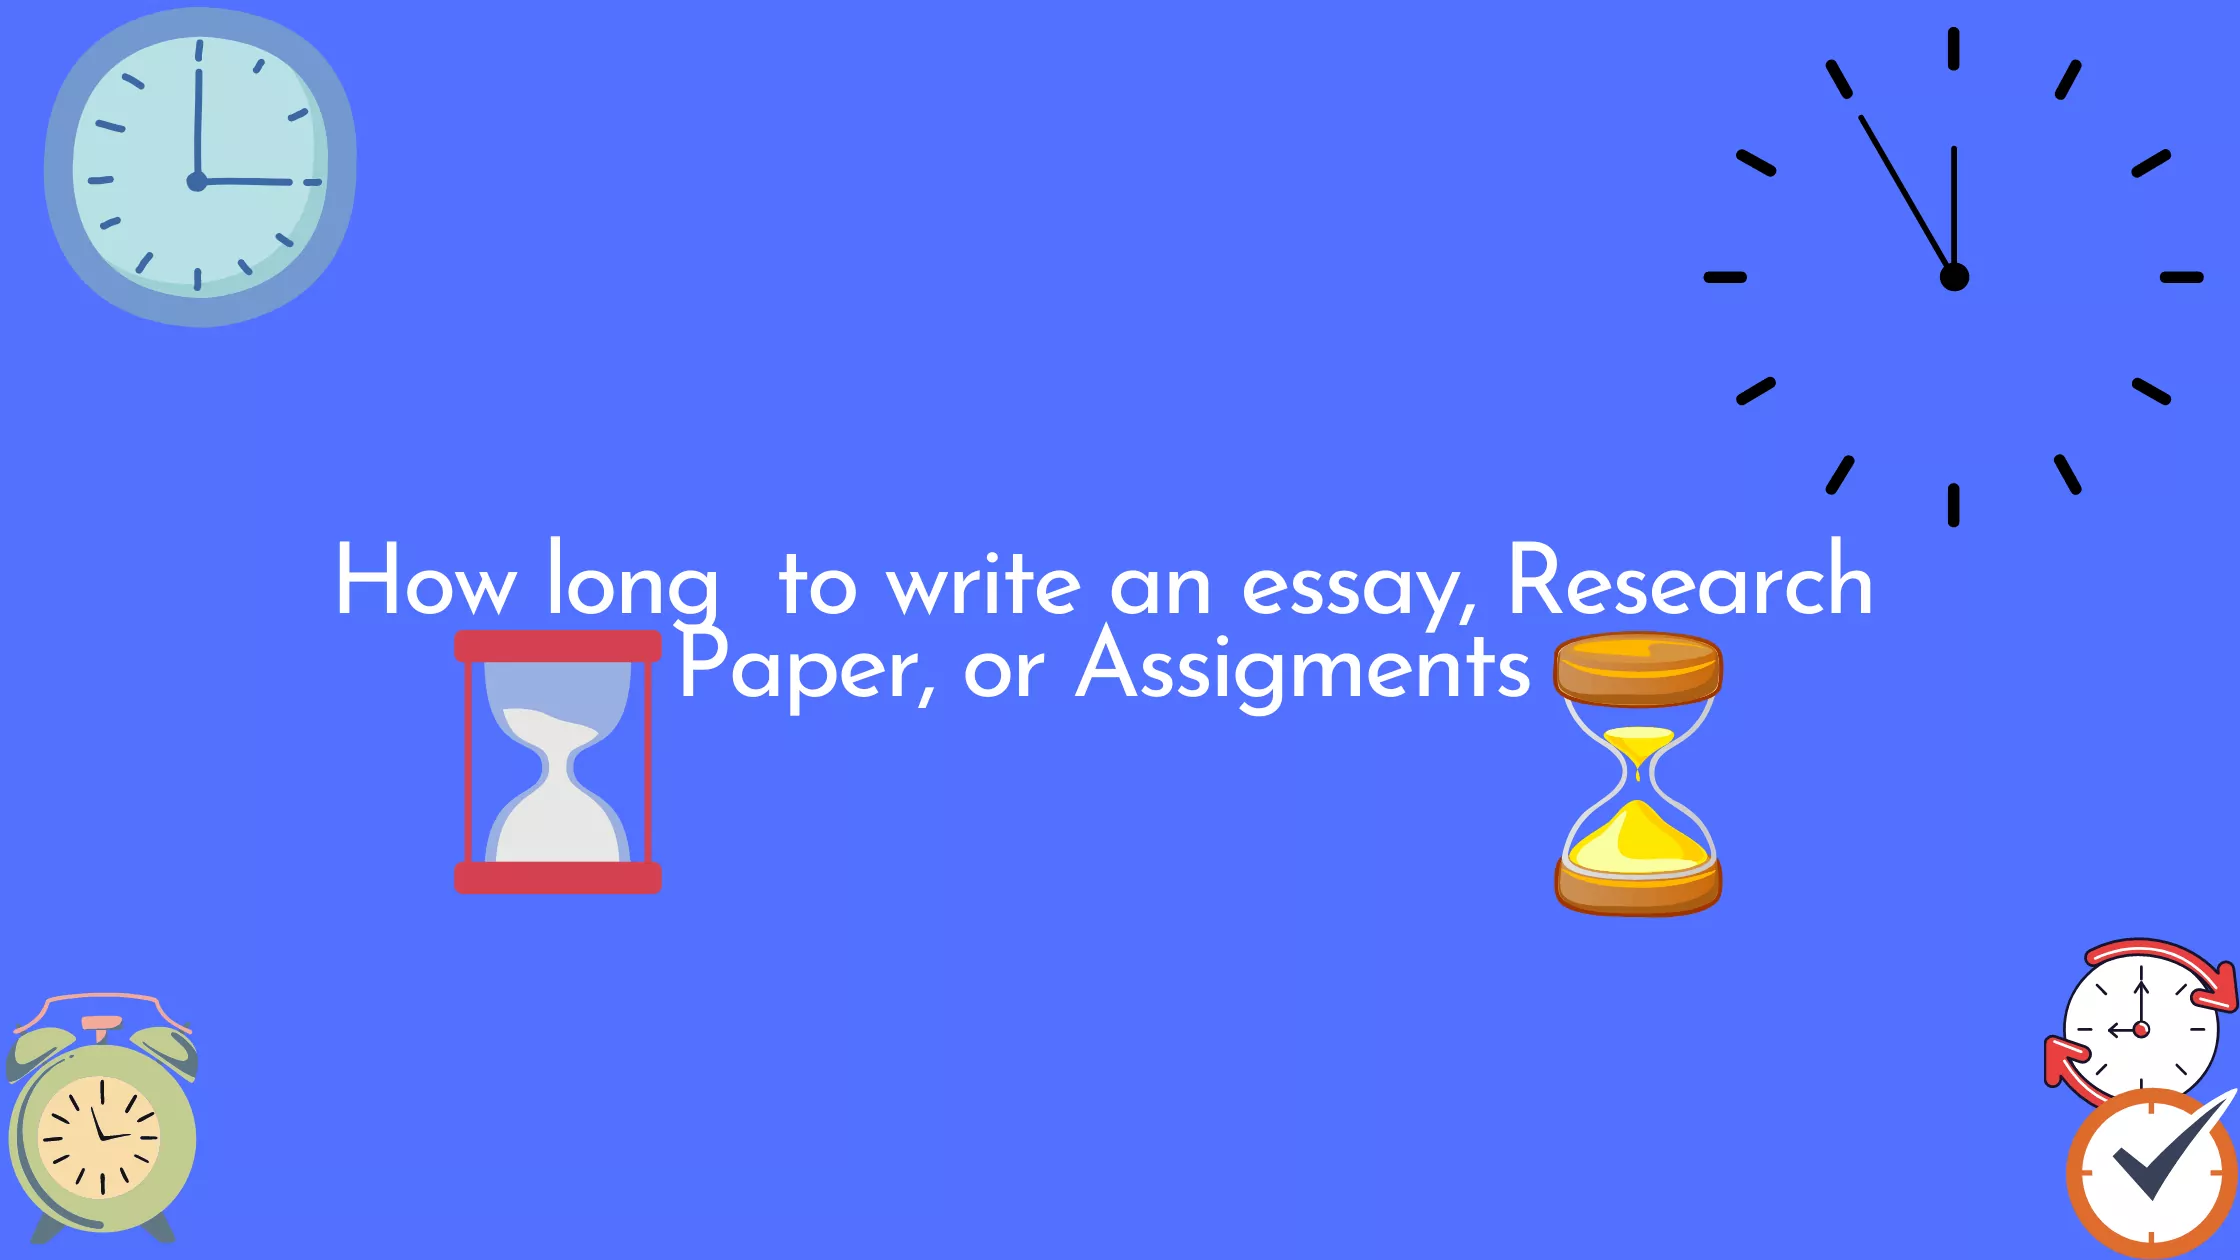 How long to write an essay